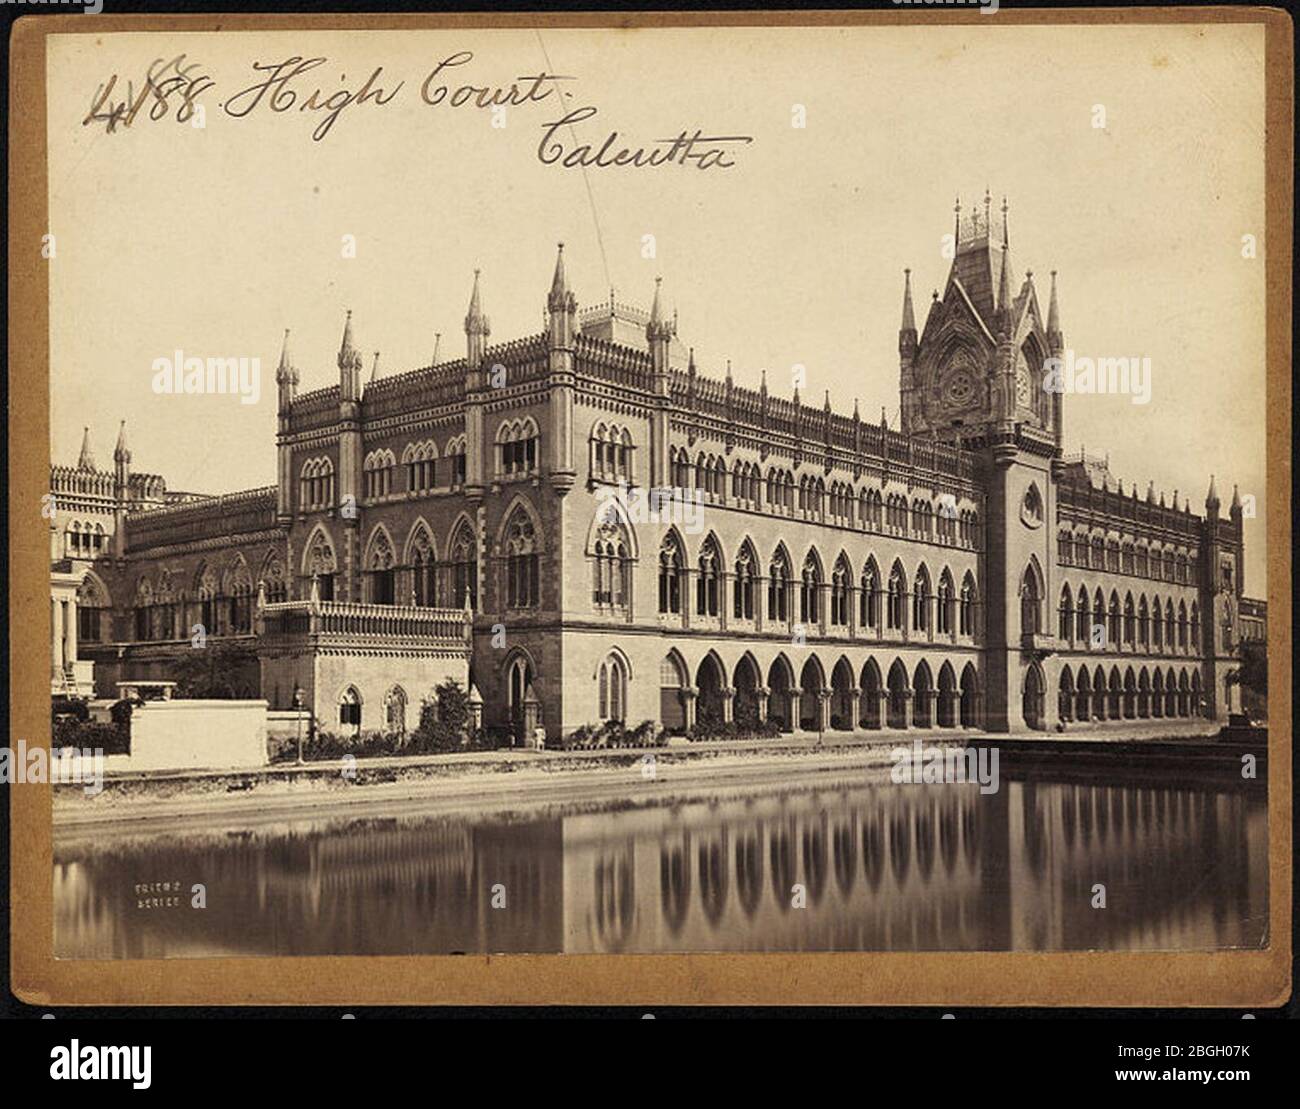 High Court of Calcutta (First view) by Francis Frith. Stock Photo